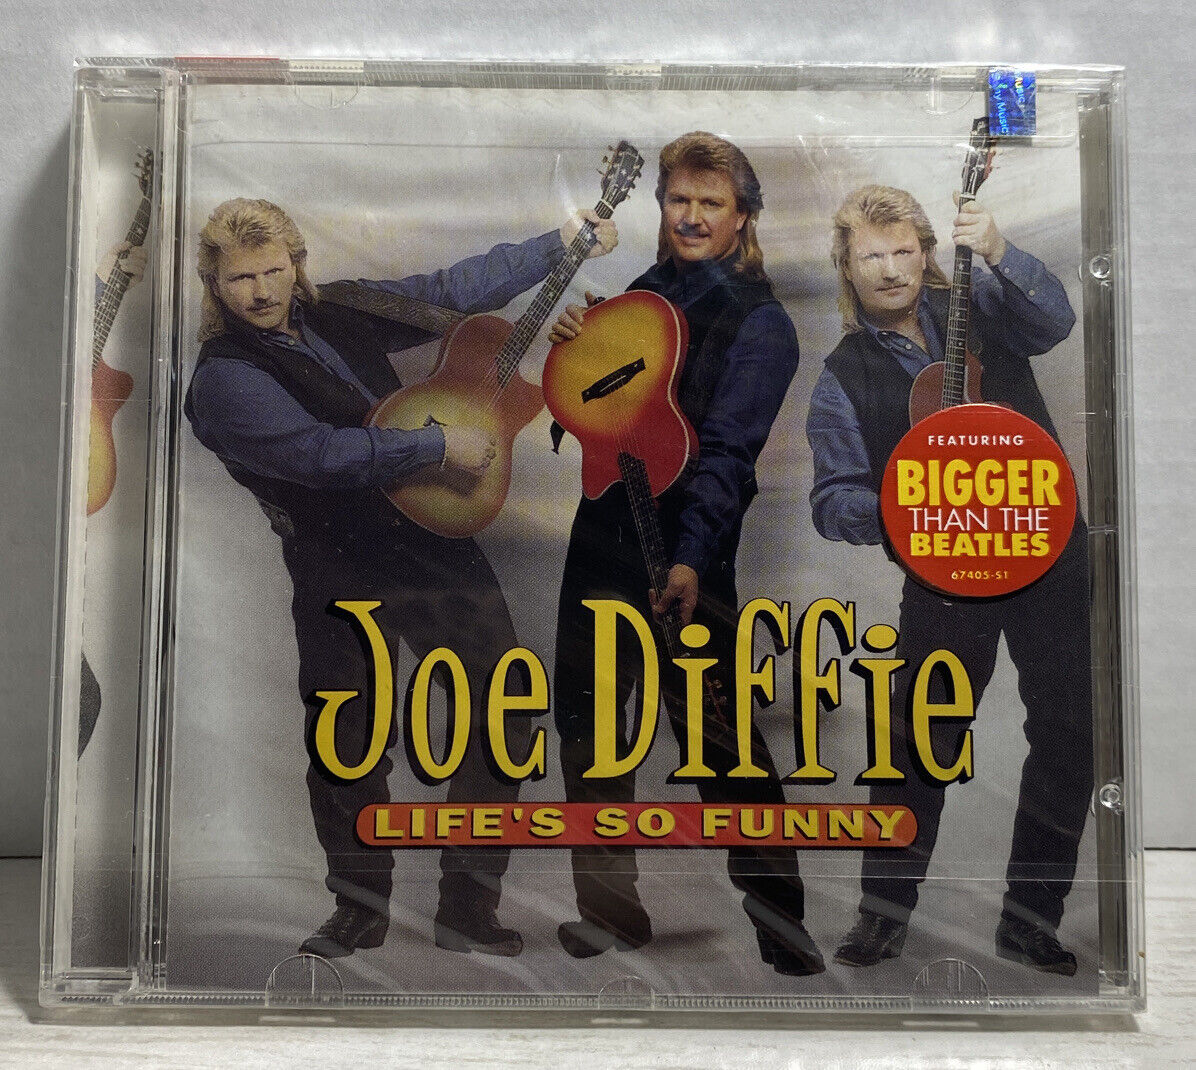 Joe Diffie Life's So Funny by Joe Diffie CD New Sealed